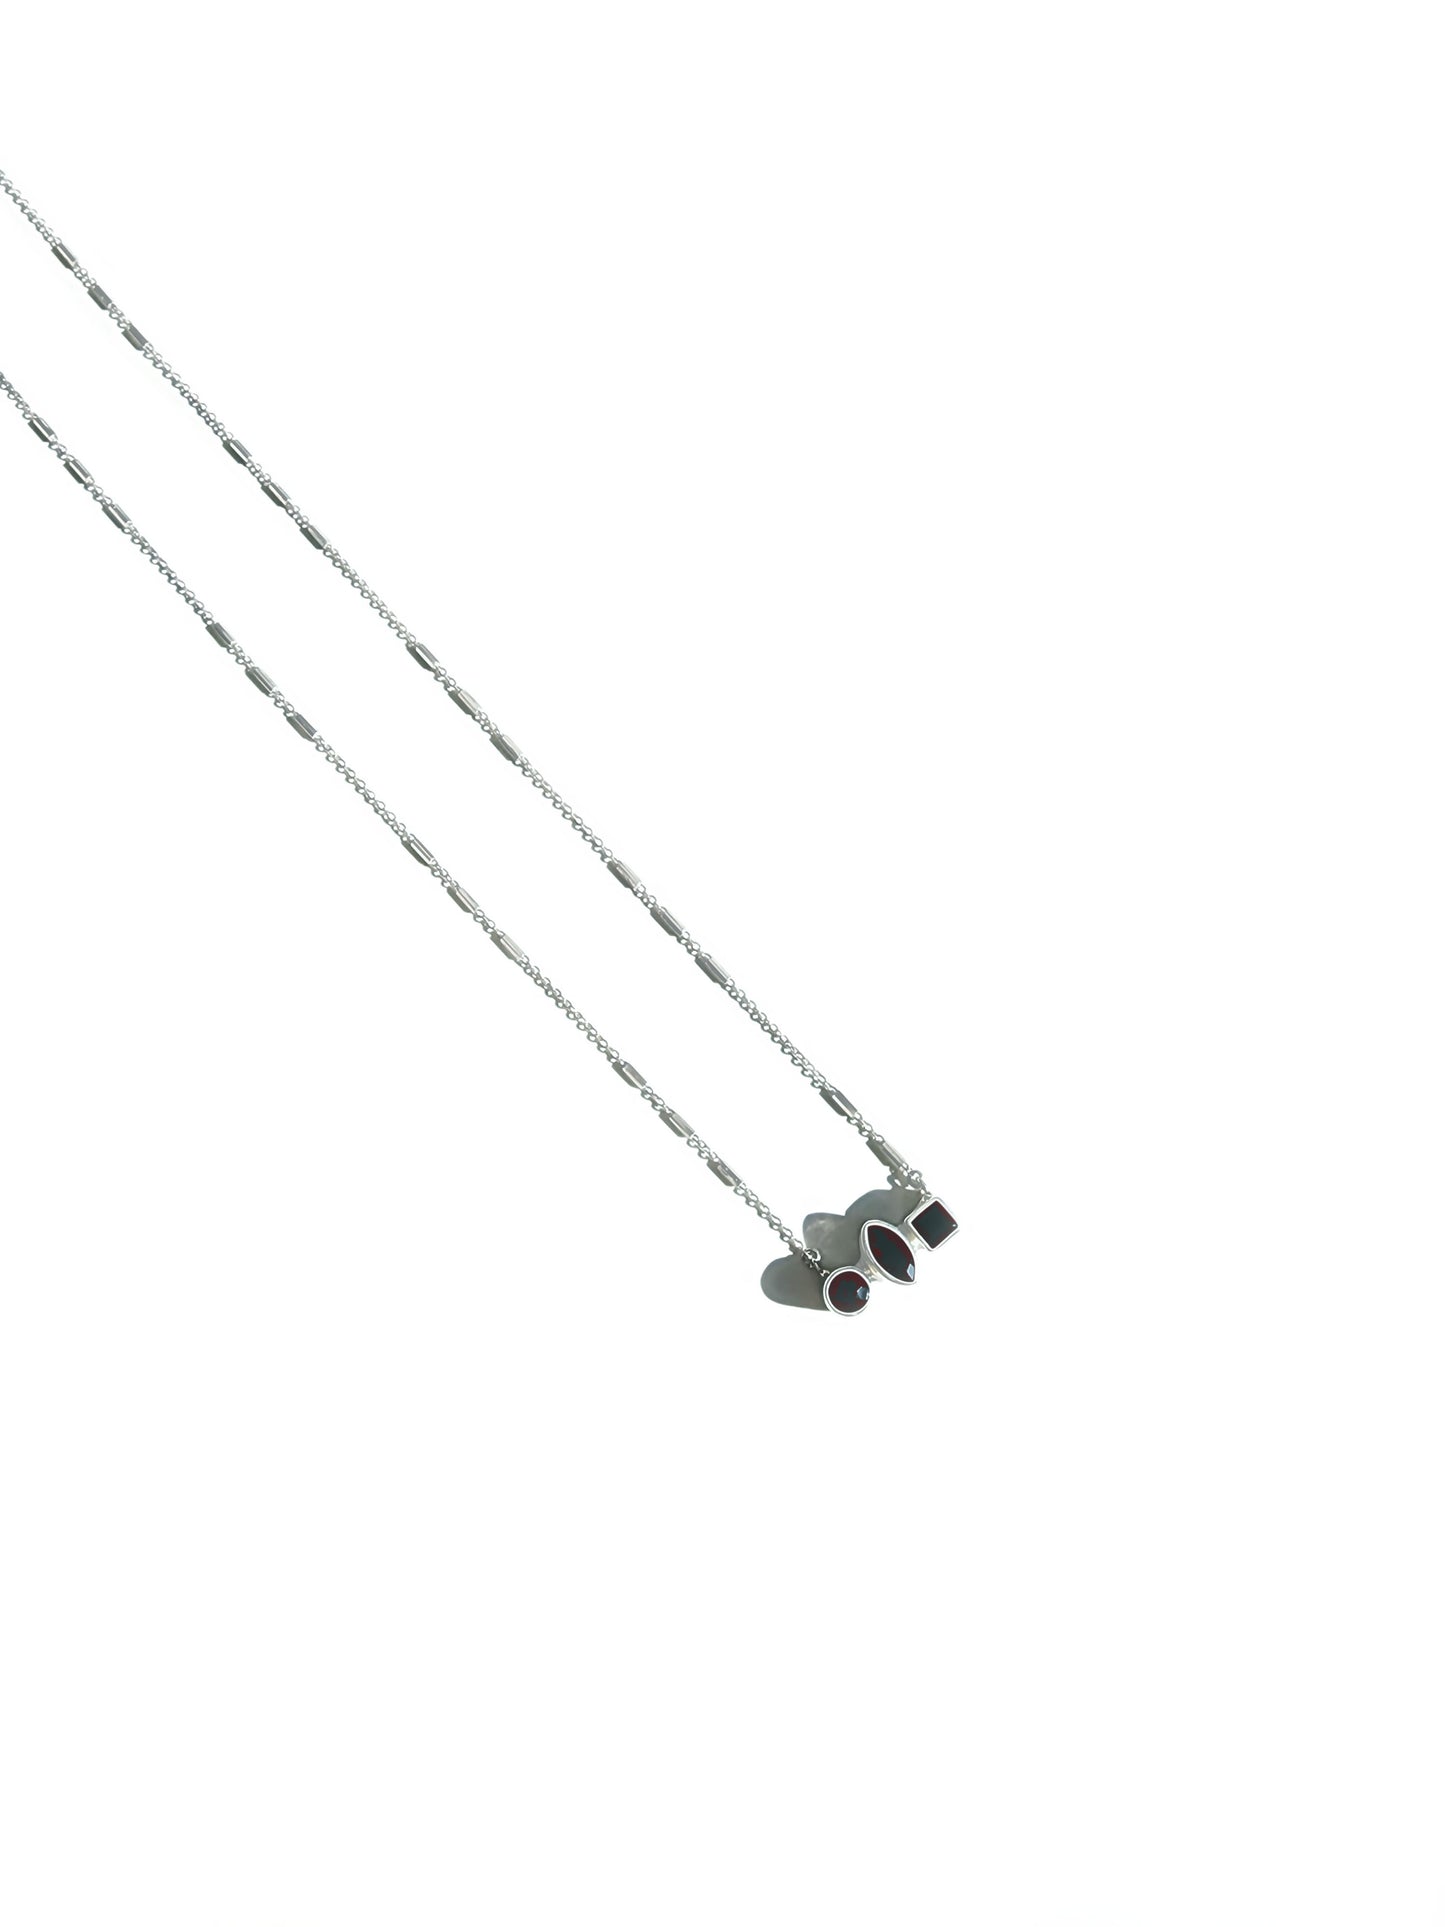 Mixed Shaped Black Tourmaline Trio Necklace in Sterling Silver